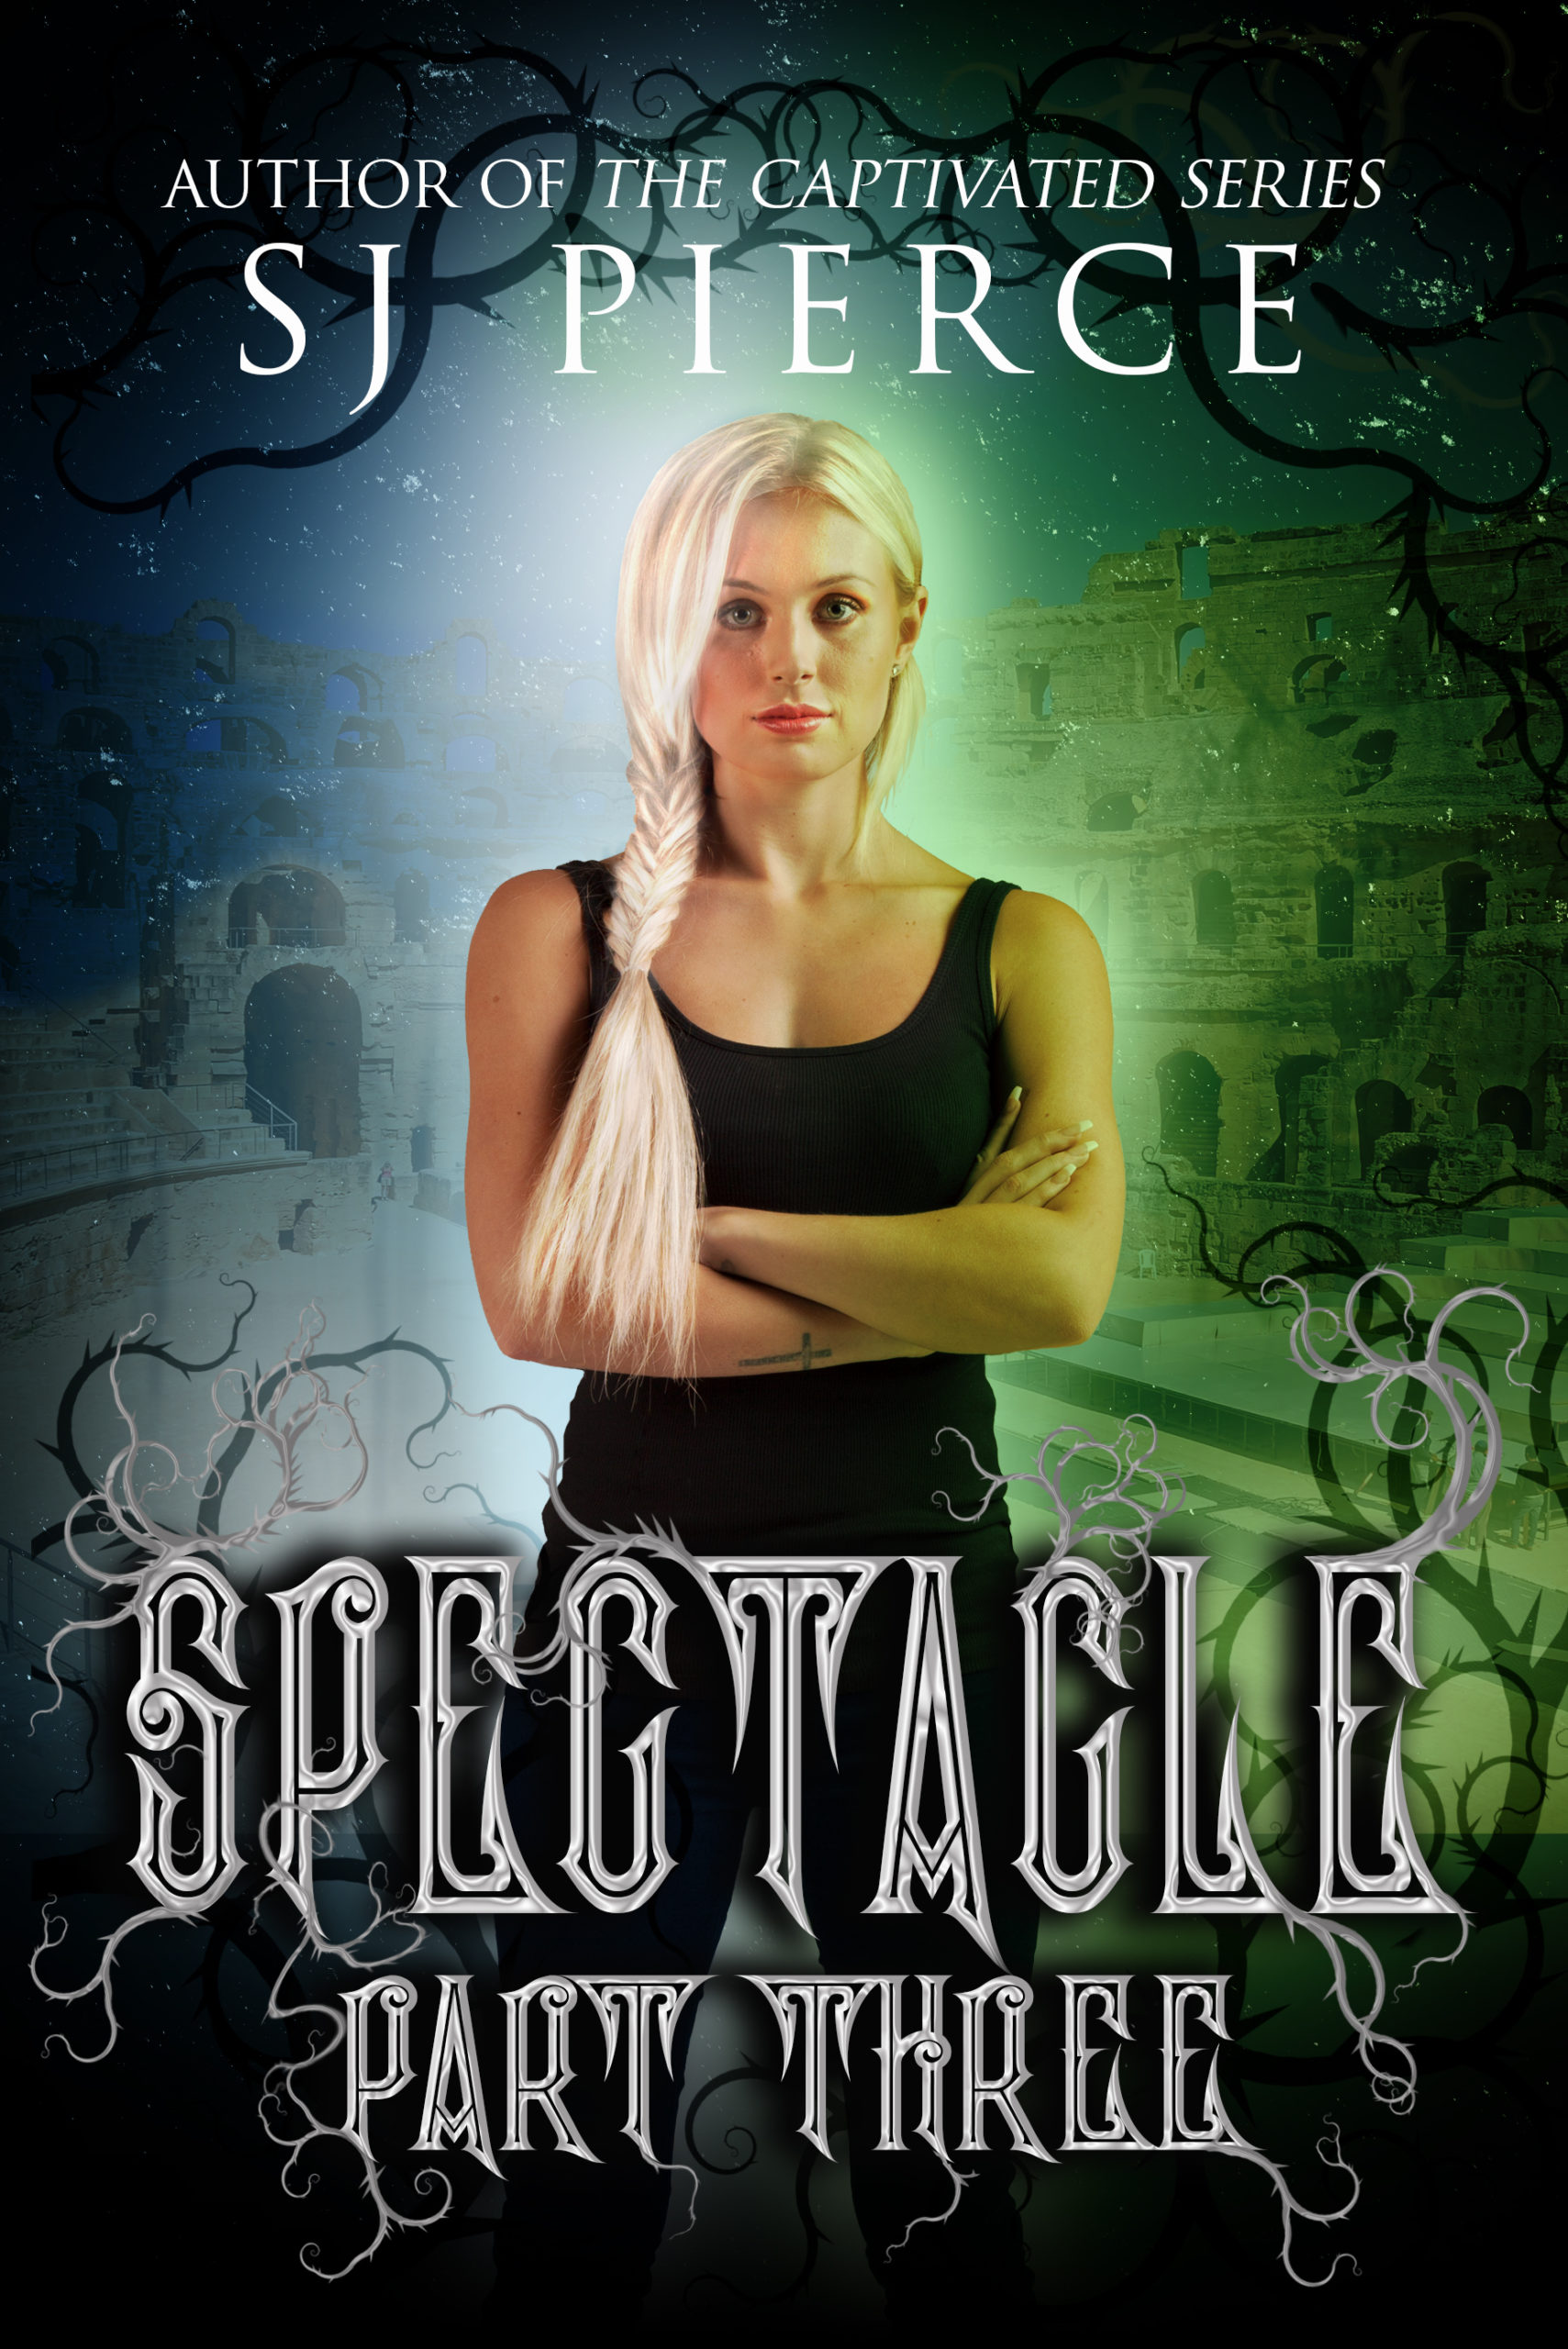 Spectacle : A Young Adult Dystopian (The Spectacle Trilogy Book 3)